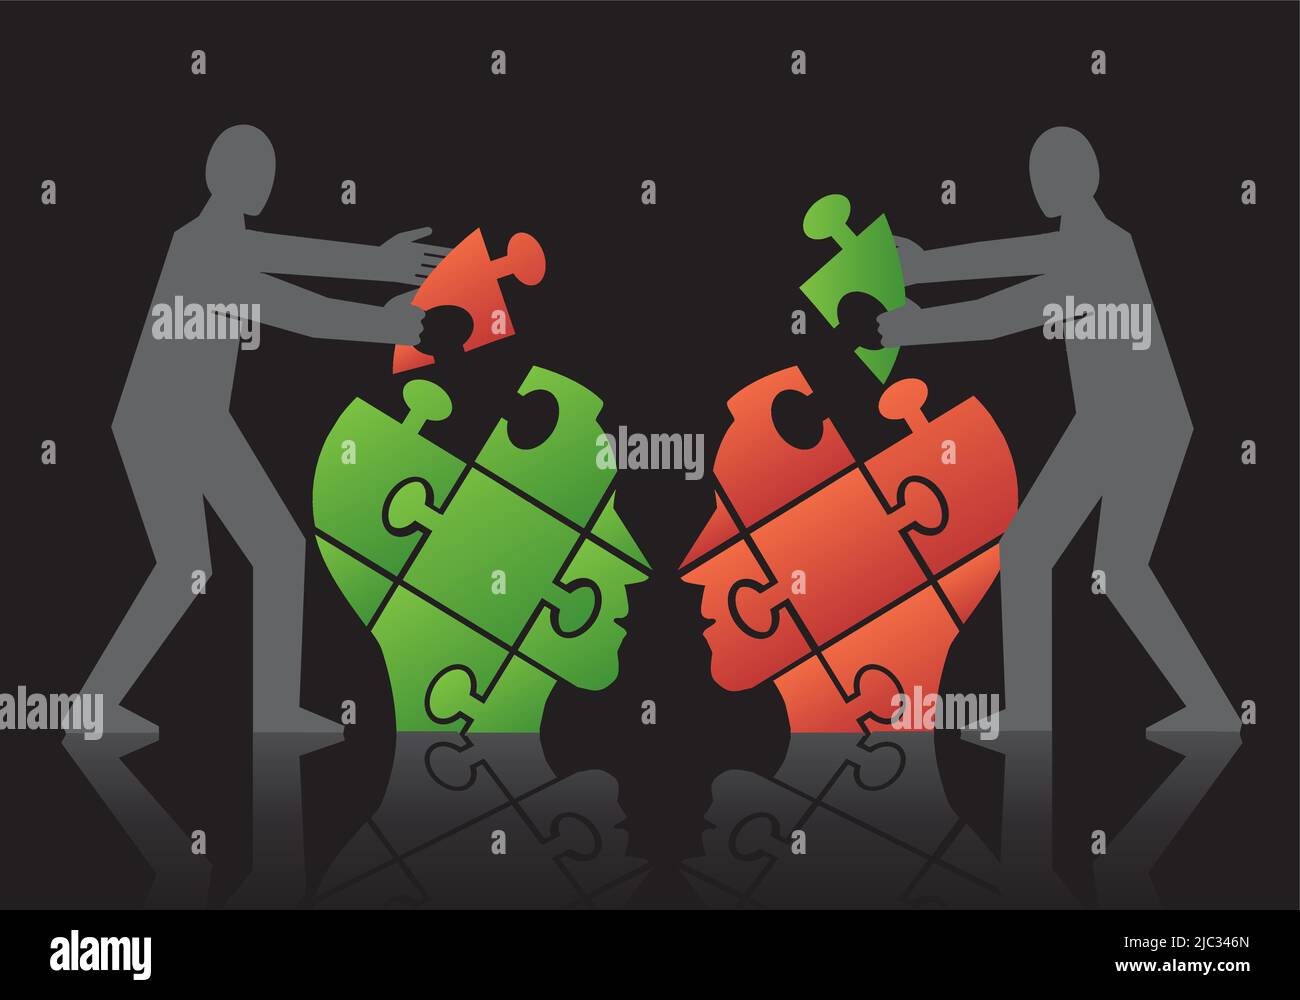 Two men, Mutual understanding and dialog, puzzle concept. Illustration of assembling a puzzle of dialog partner's head. Psychology of relationship. Stock Vector